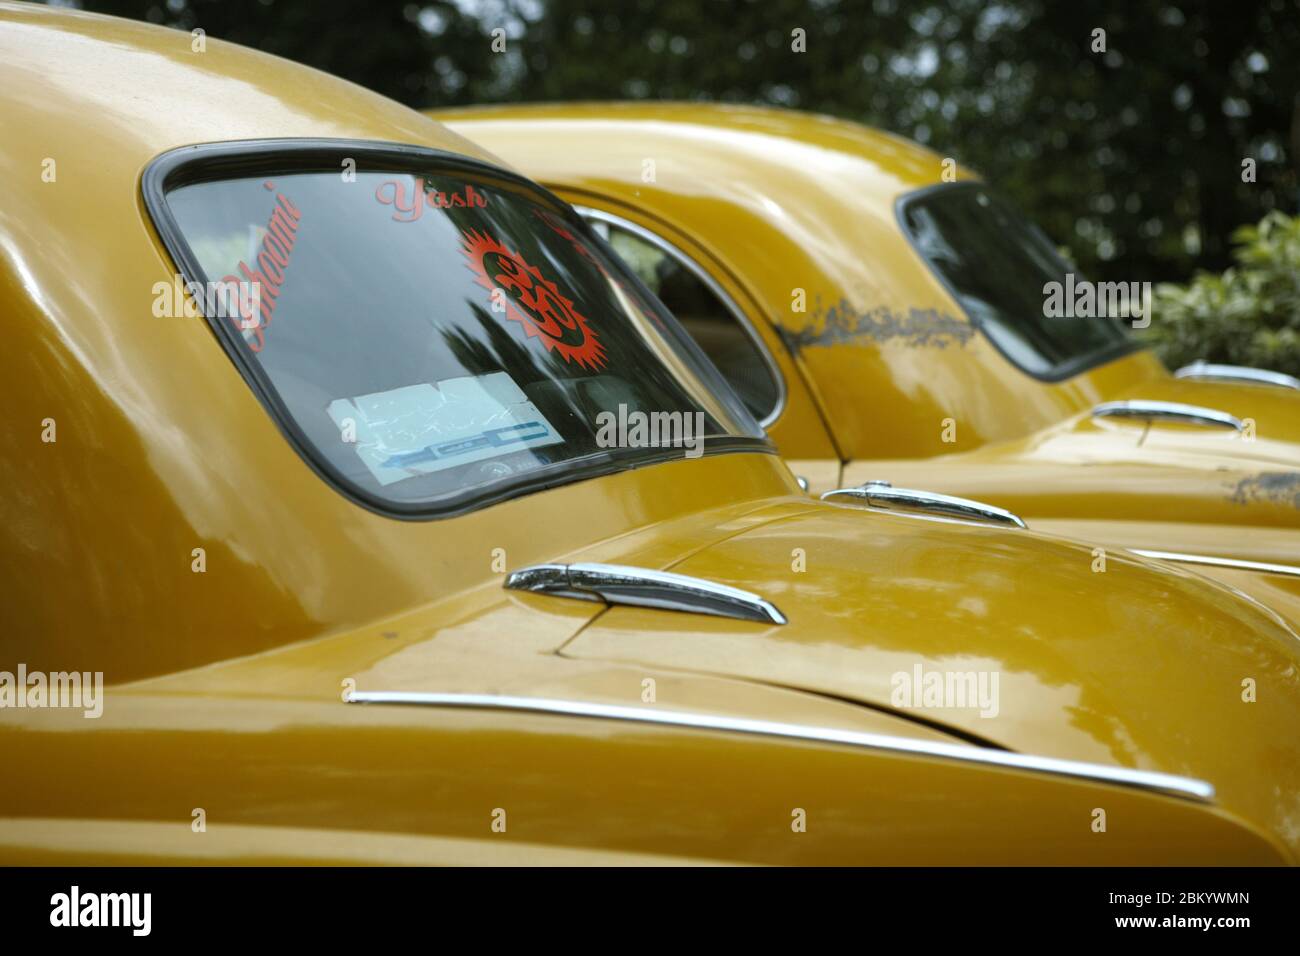 Yellow taxis in a parking lot. Kolkata City, West Bengal, India. Stock Photo